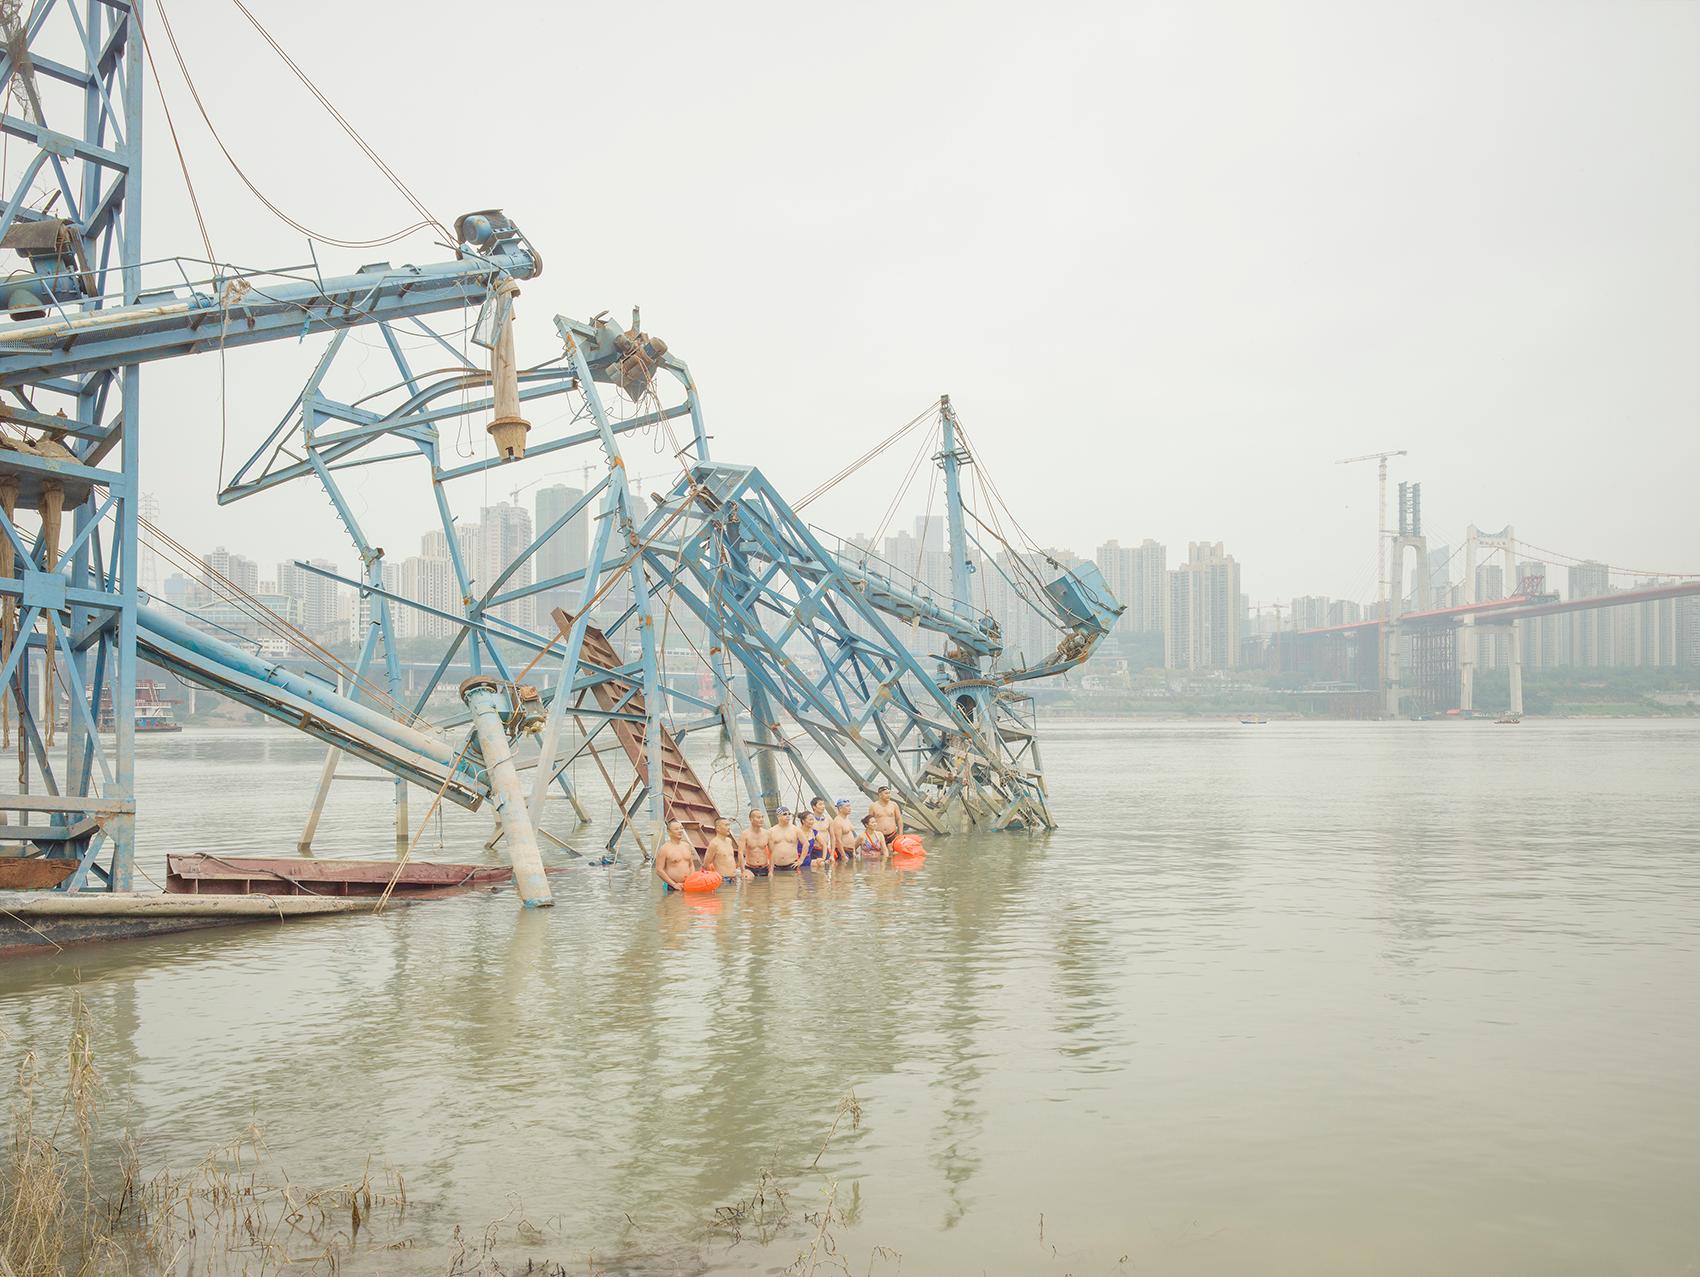 Abandoned Boats, 2017 - Zhang Kechun (Landscape Colour Photography)
Signed and numbered on reverse
Archival pigment print

Available in two sizes:
39 1/4 x 31 1/2 inches, edition of 7 + 1 AP
59 x 47 inches, edition of 3 + 1 AP

Zhang Kechun produces